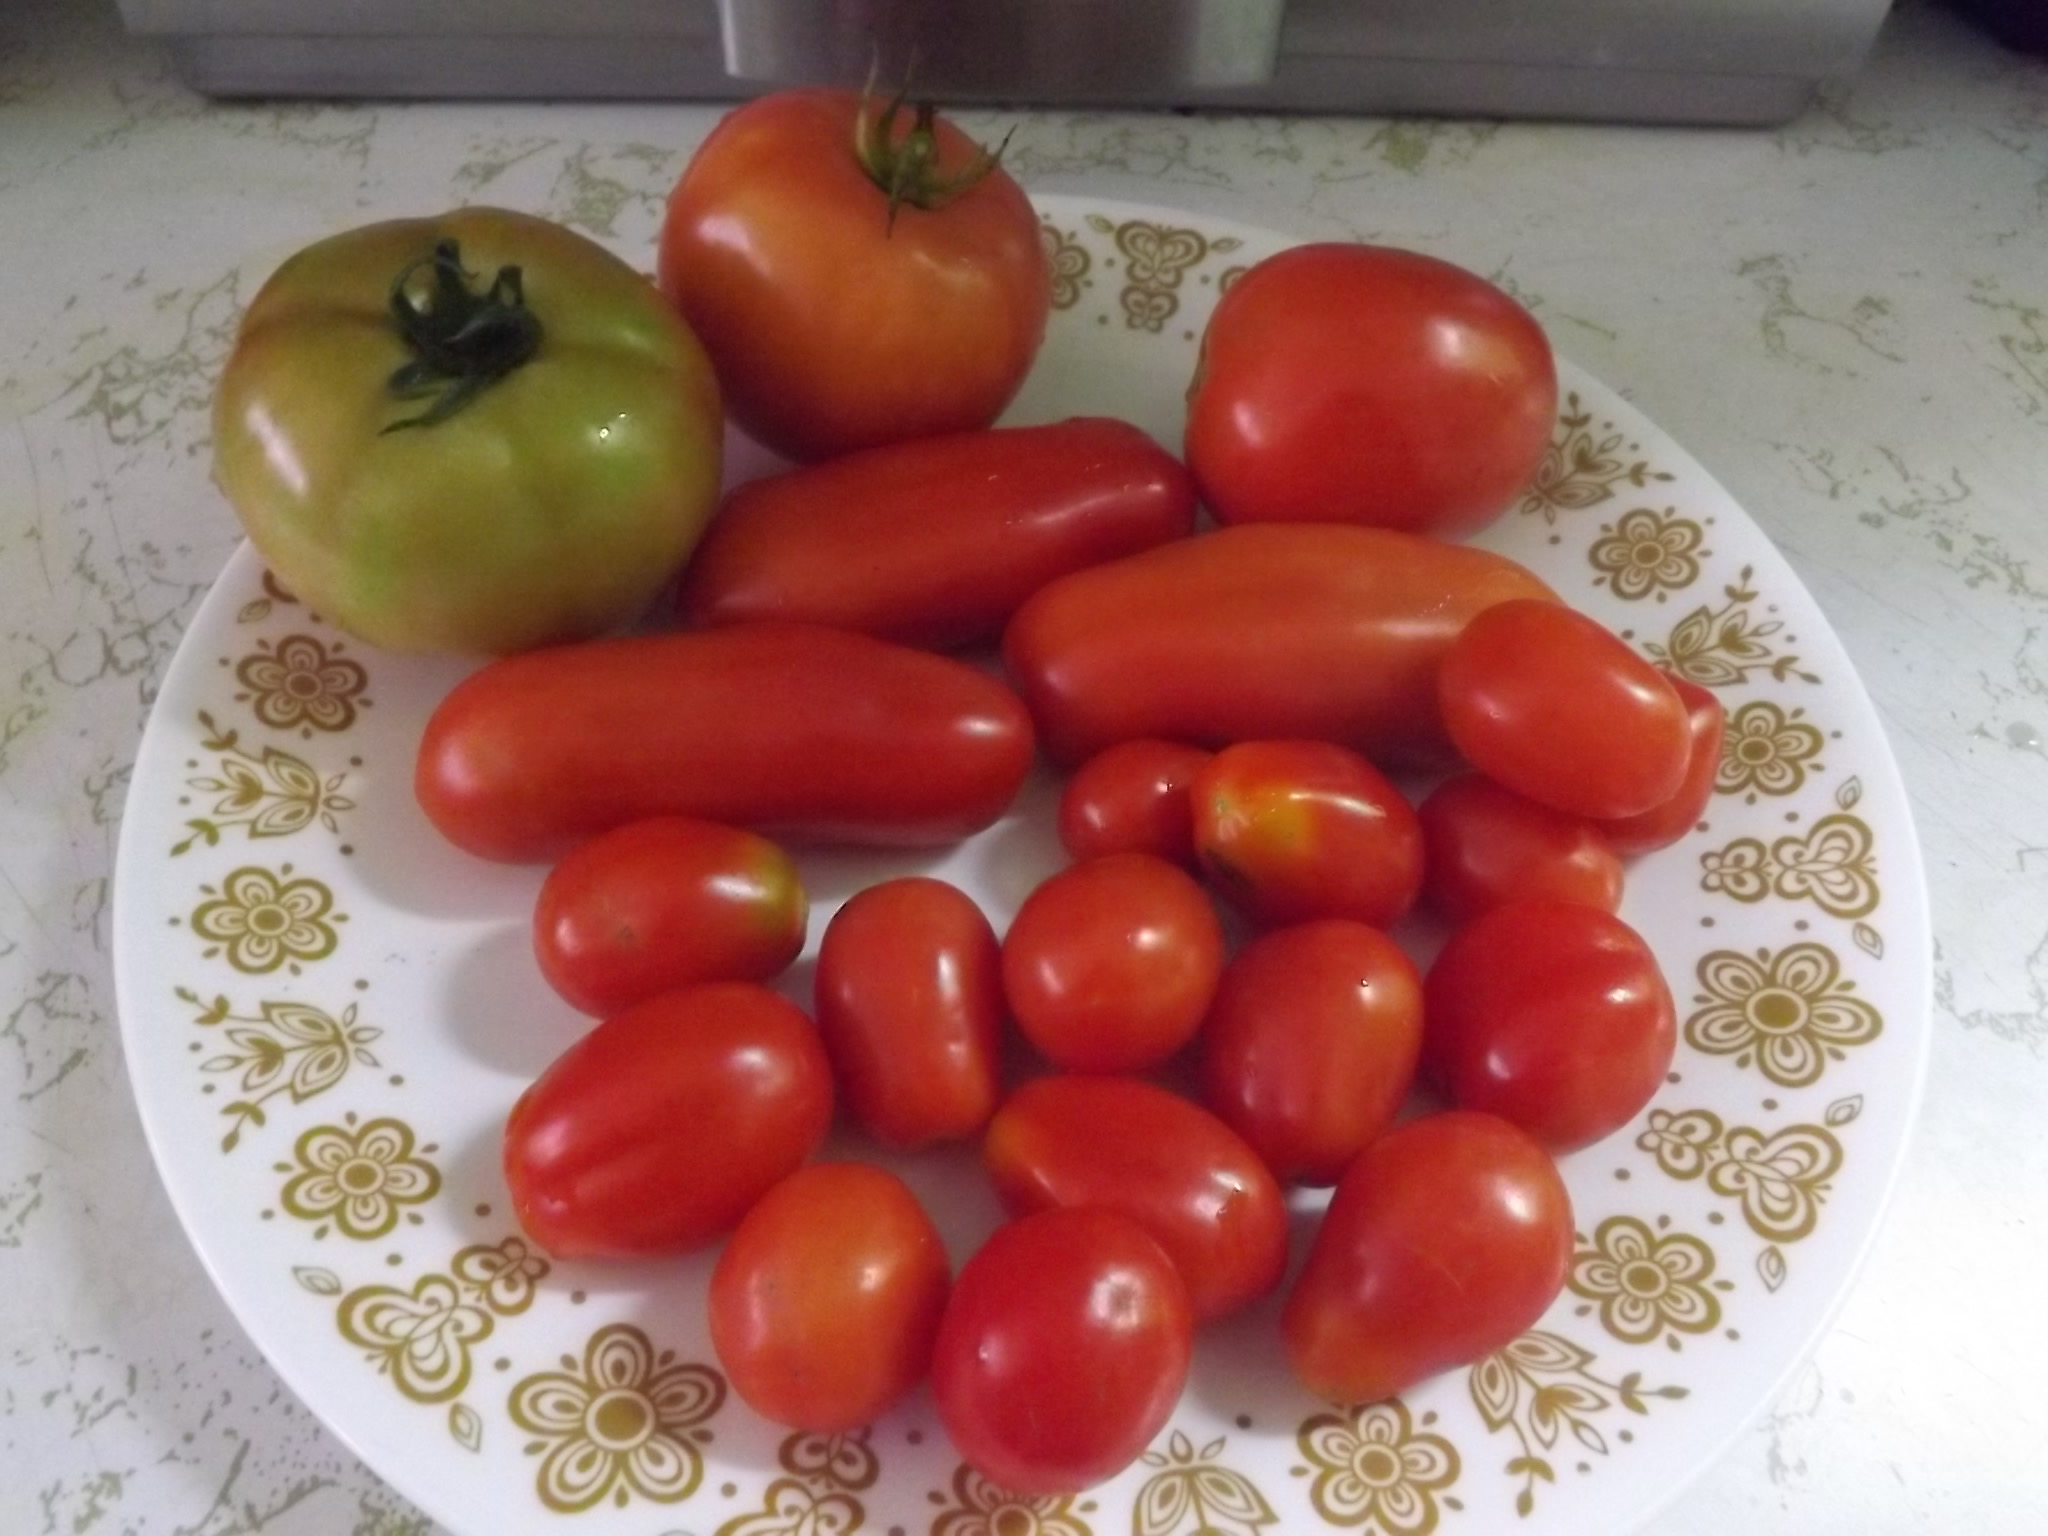 different varieties of tomatoes on a plate